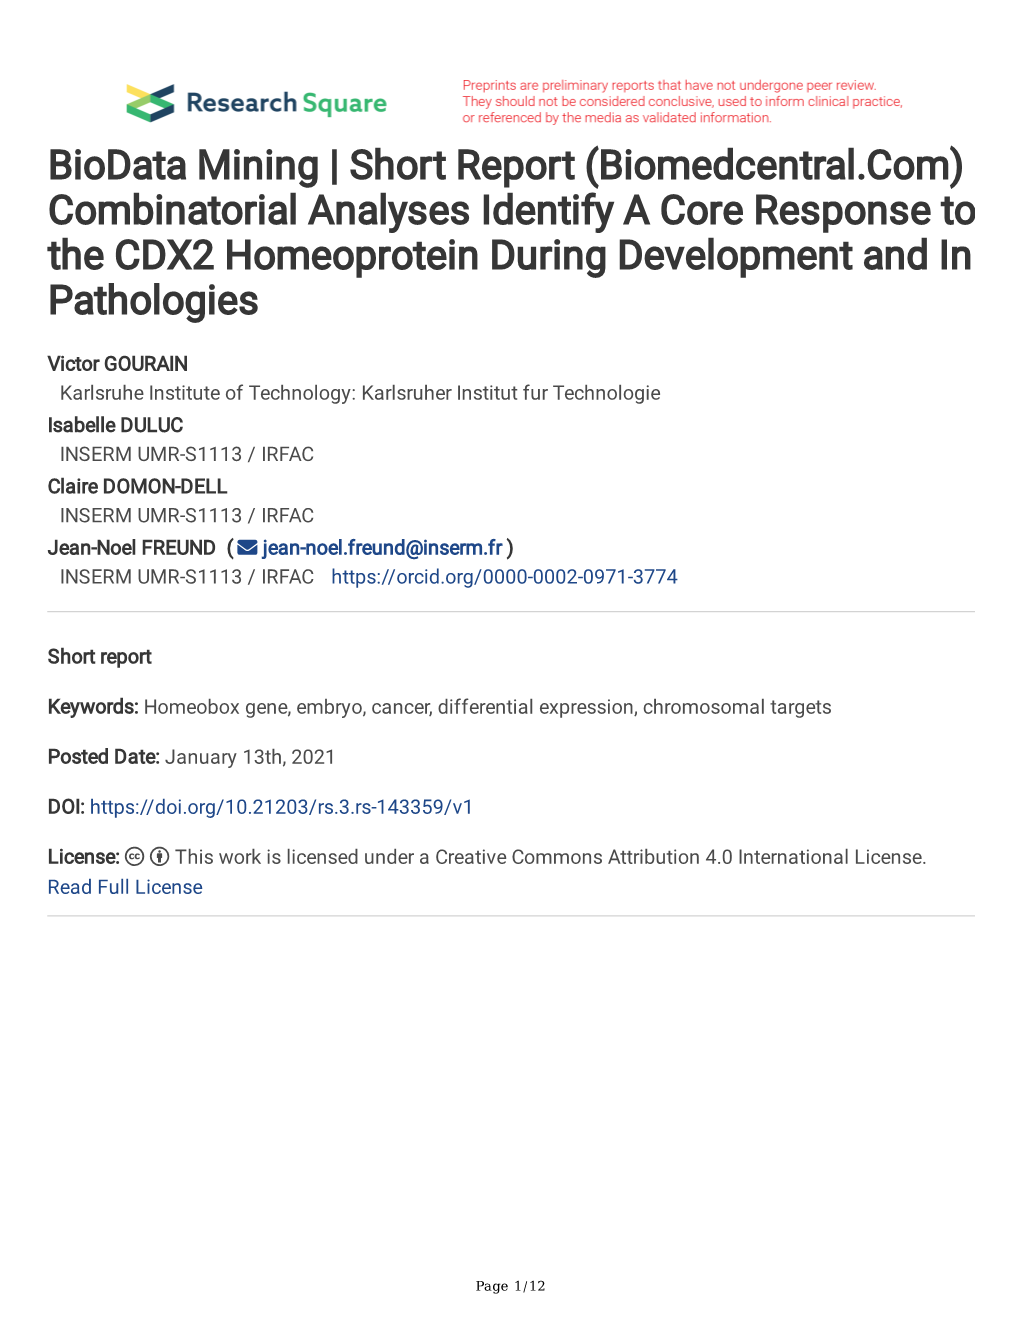 Biodata Mining | Short Report (Biomedcentral.Com) Combinatorial Analyses Identify a Core Response to the CDX2 Homeoprotein During Development and in Pathologies